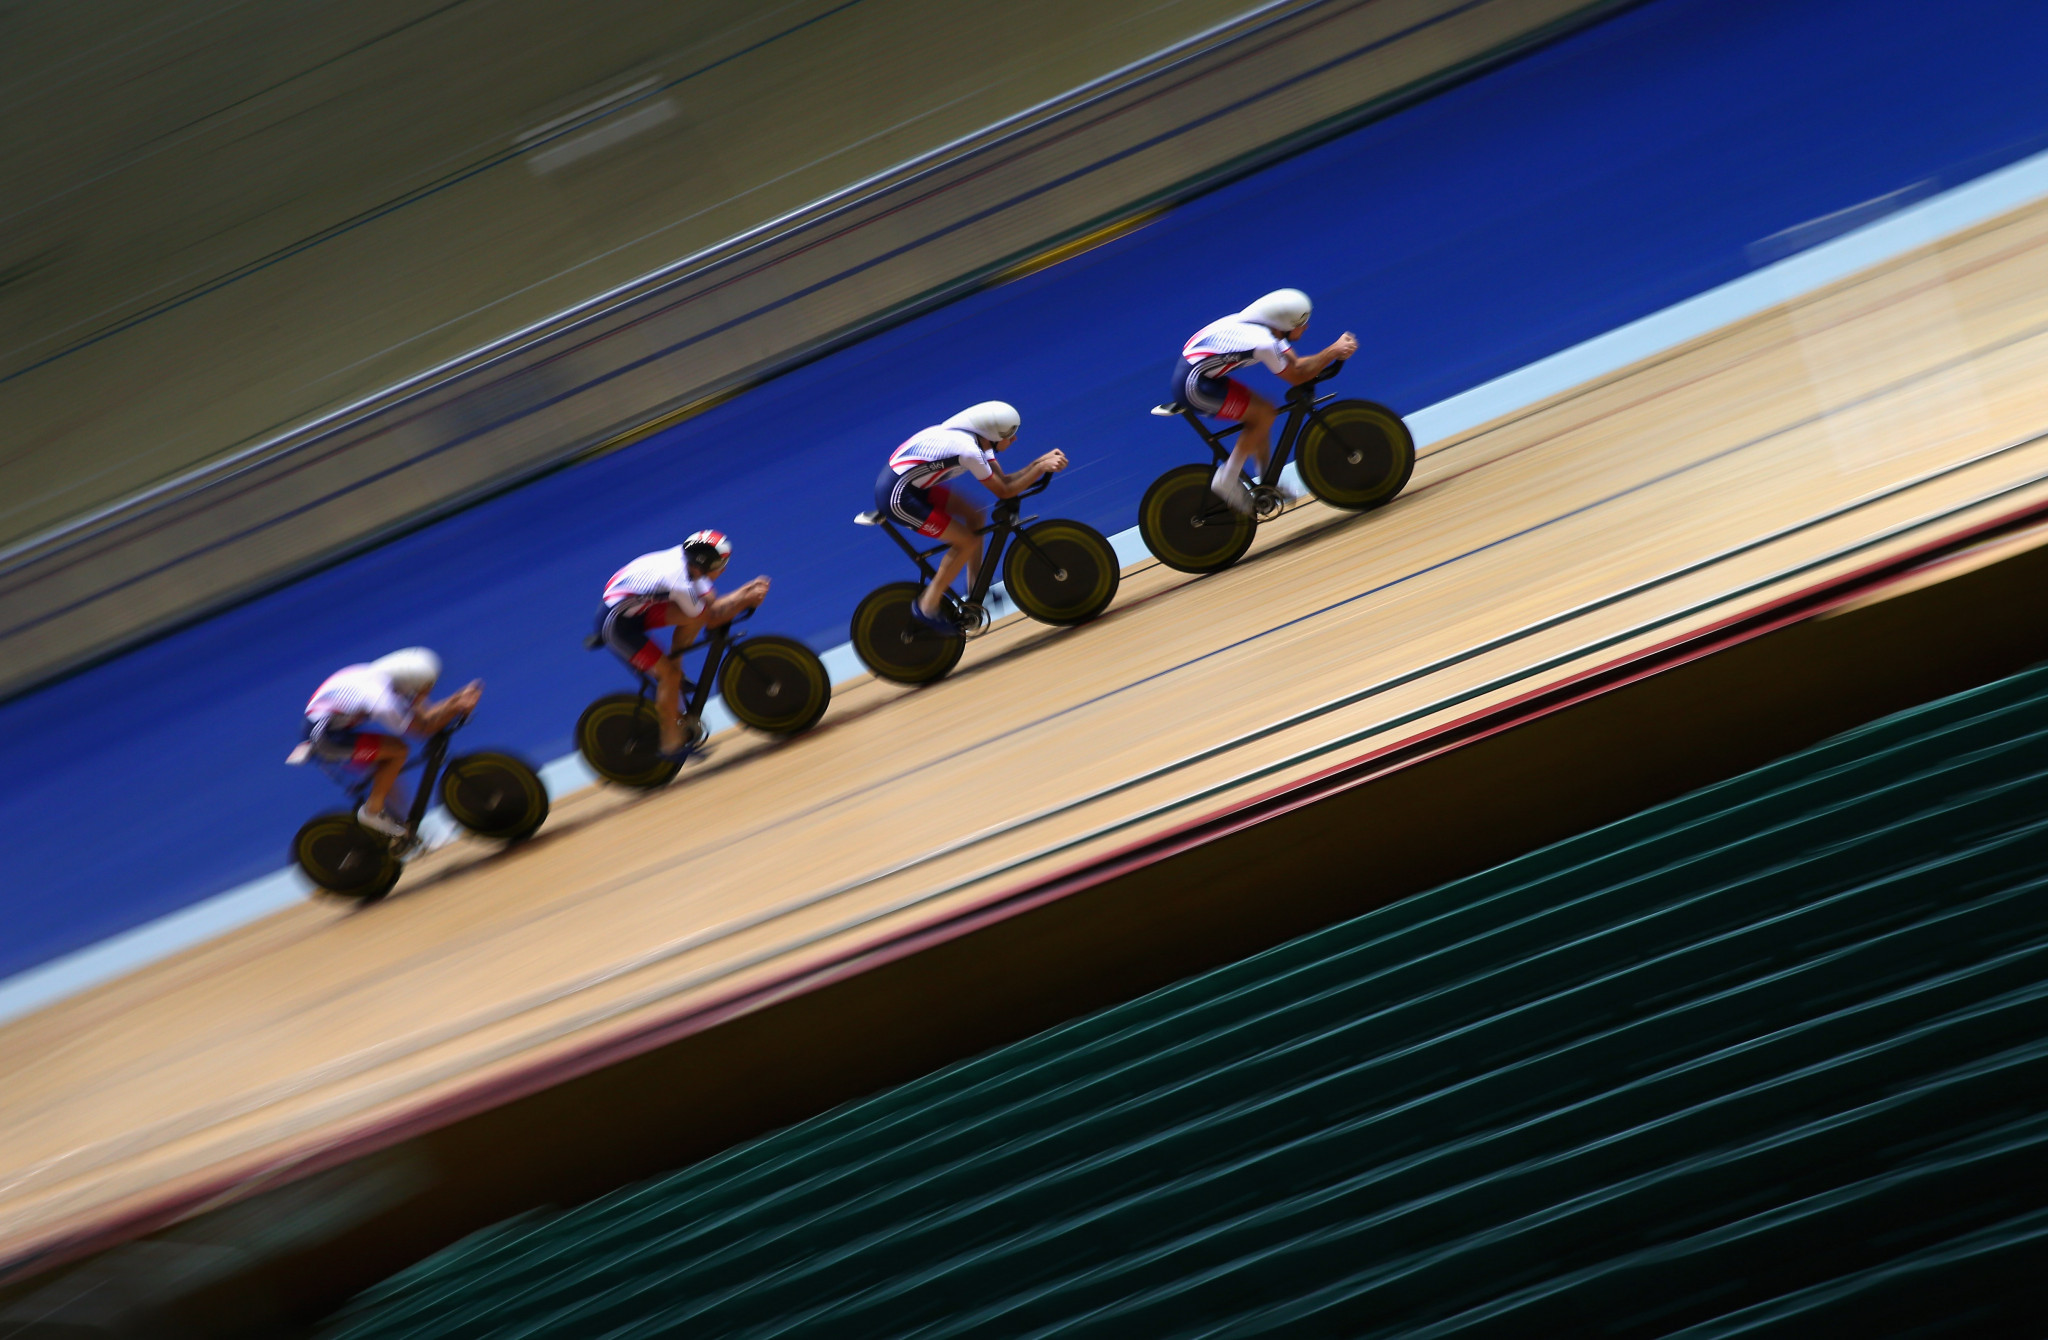 British Cycling defends decision to hold pre-Tokyo 2020 track meeting during lockdown